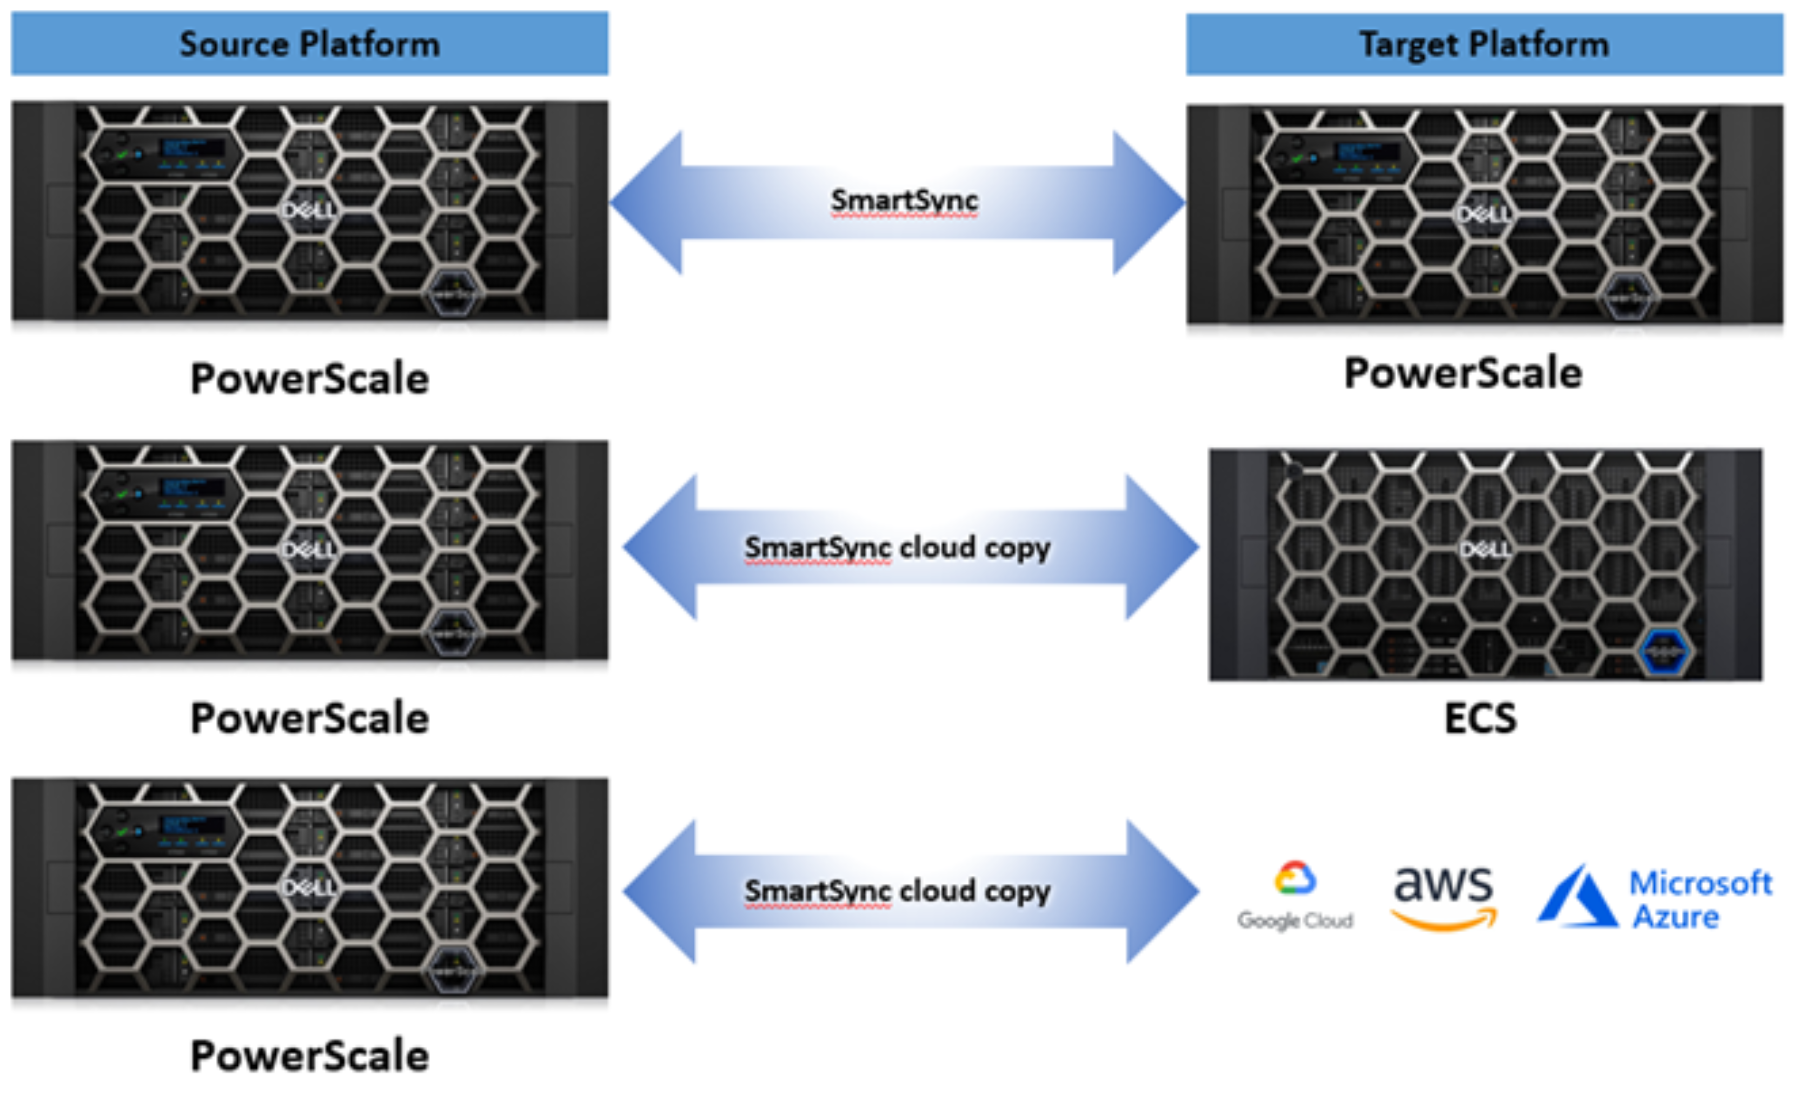 A figure illustrating PowerScale cross platform data mobility from PowerScale to PowerScale, PowerScale to ECS, and finally PowerScale to Google Cloud, AWS, or Azure.